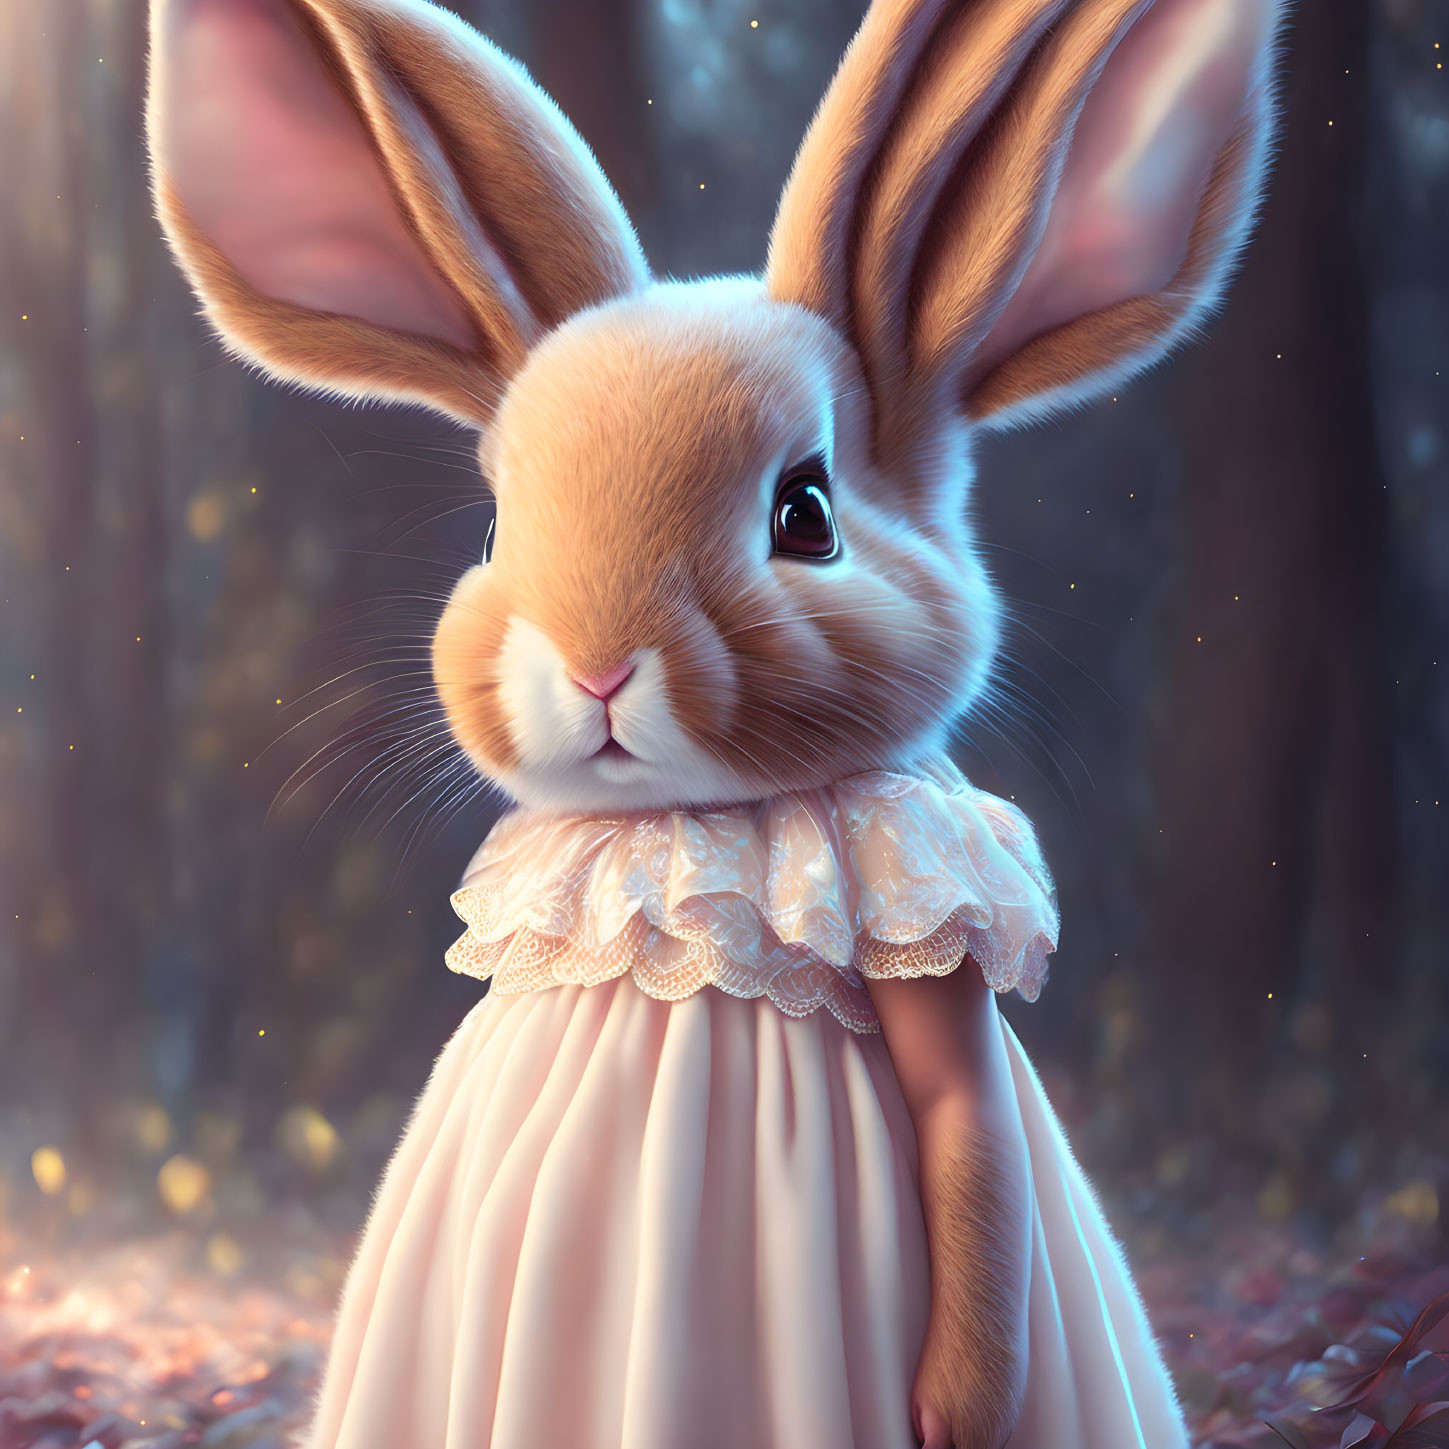 Anthropomorphic rabbit in lace dress in magical forest